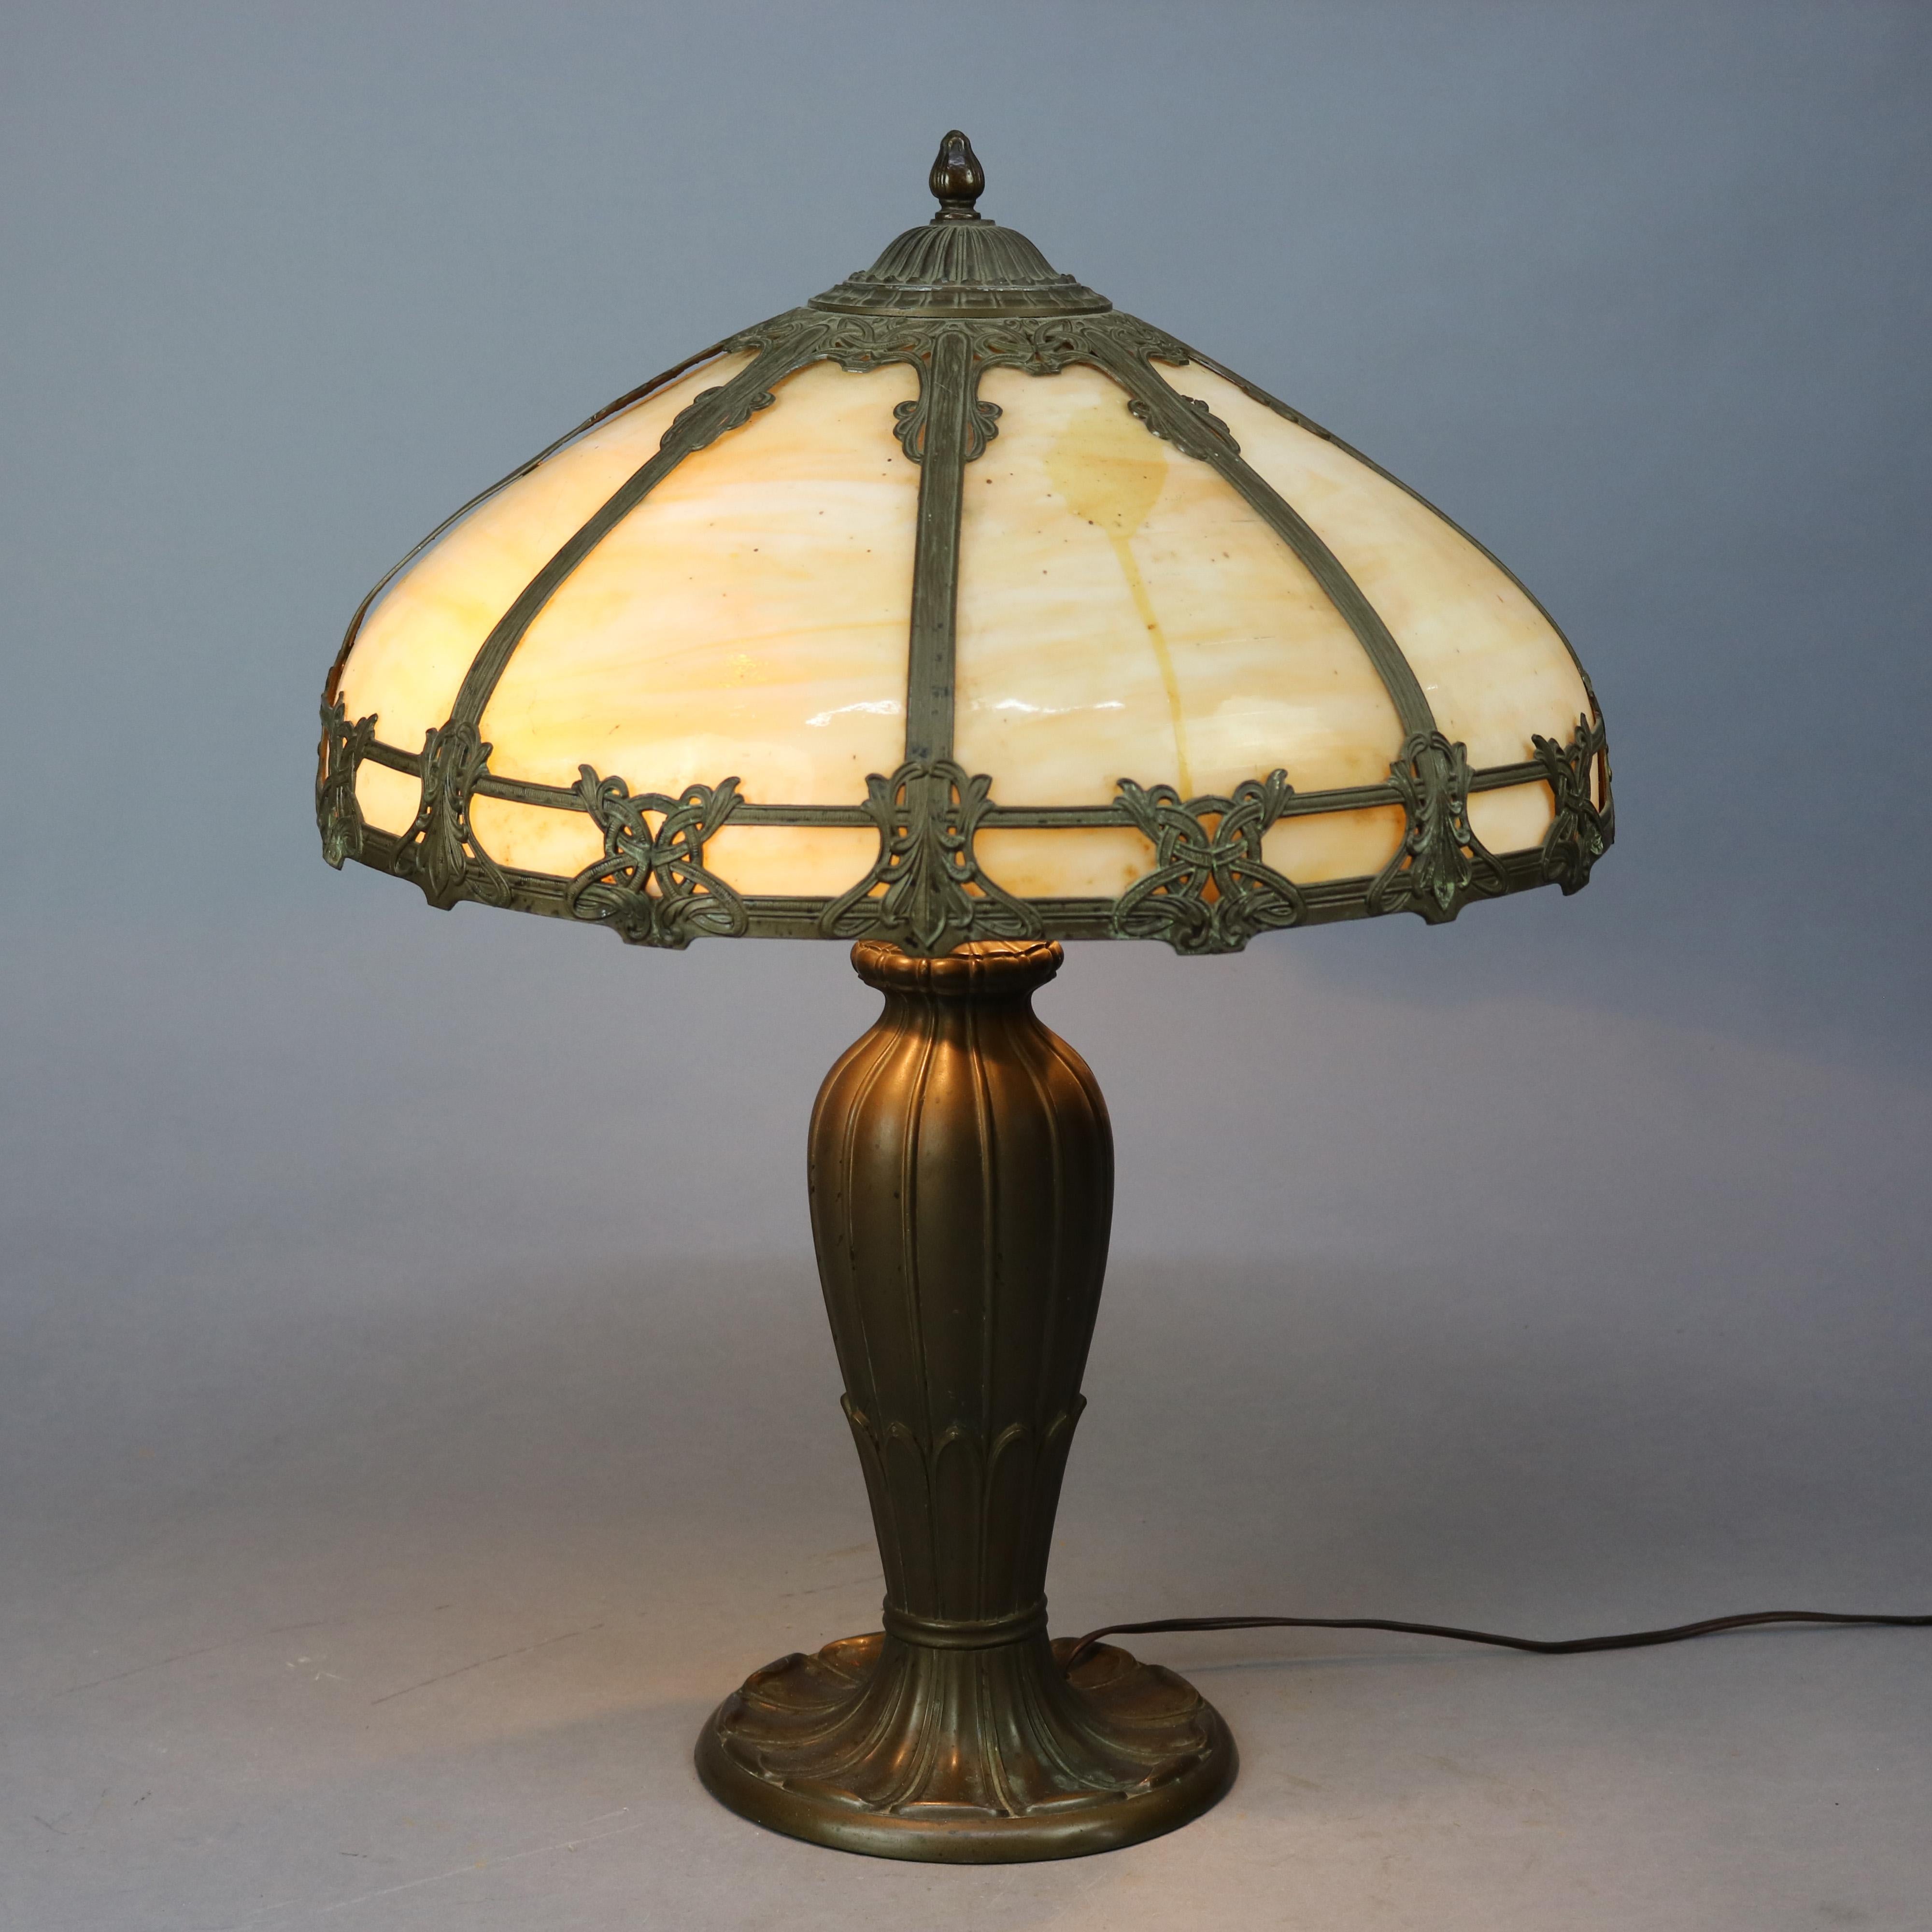 An antique Arts & Crafts table lamp in the manner of Bradley and Hubbard offers dome shade with foliate cast frame housing bent slag glass panels over cast urn form double socket base, c1910
School slag glass table lamp Circa 1910

Measures -